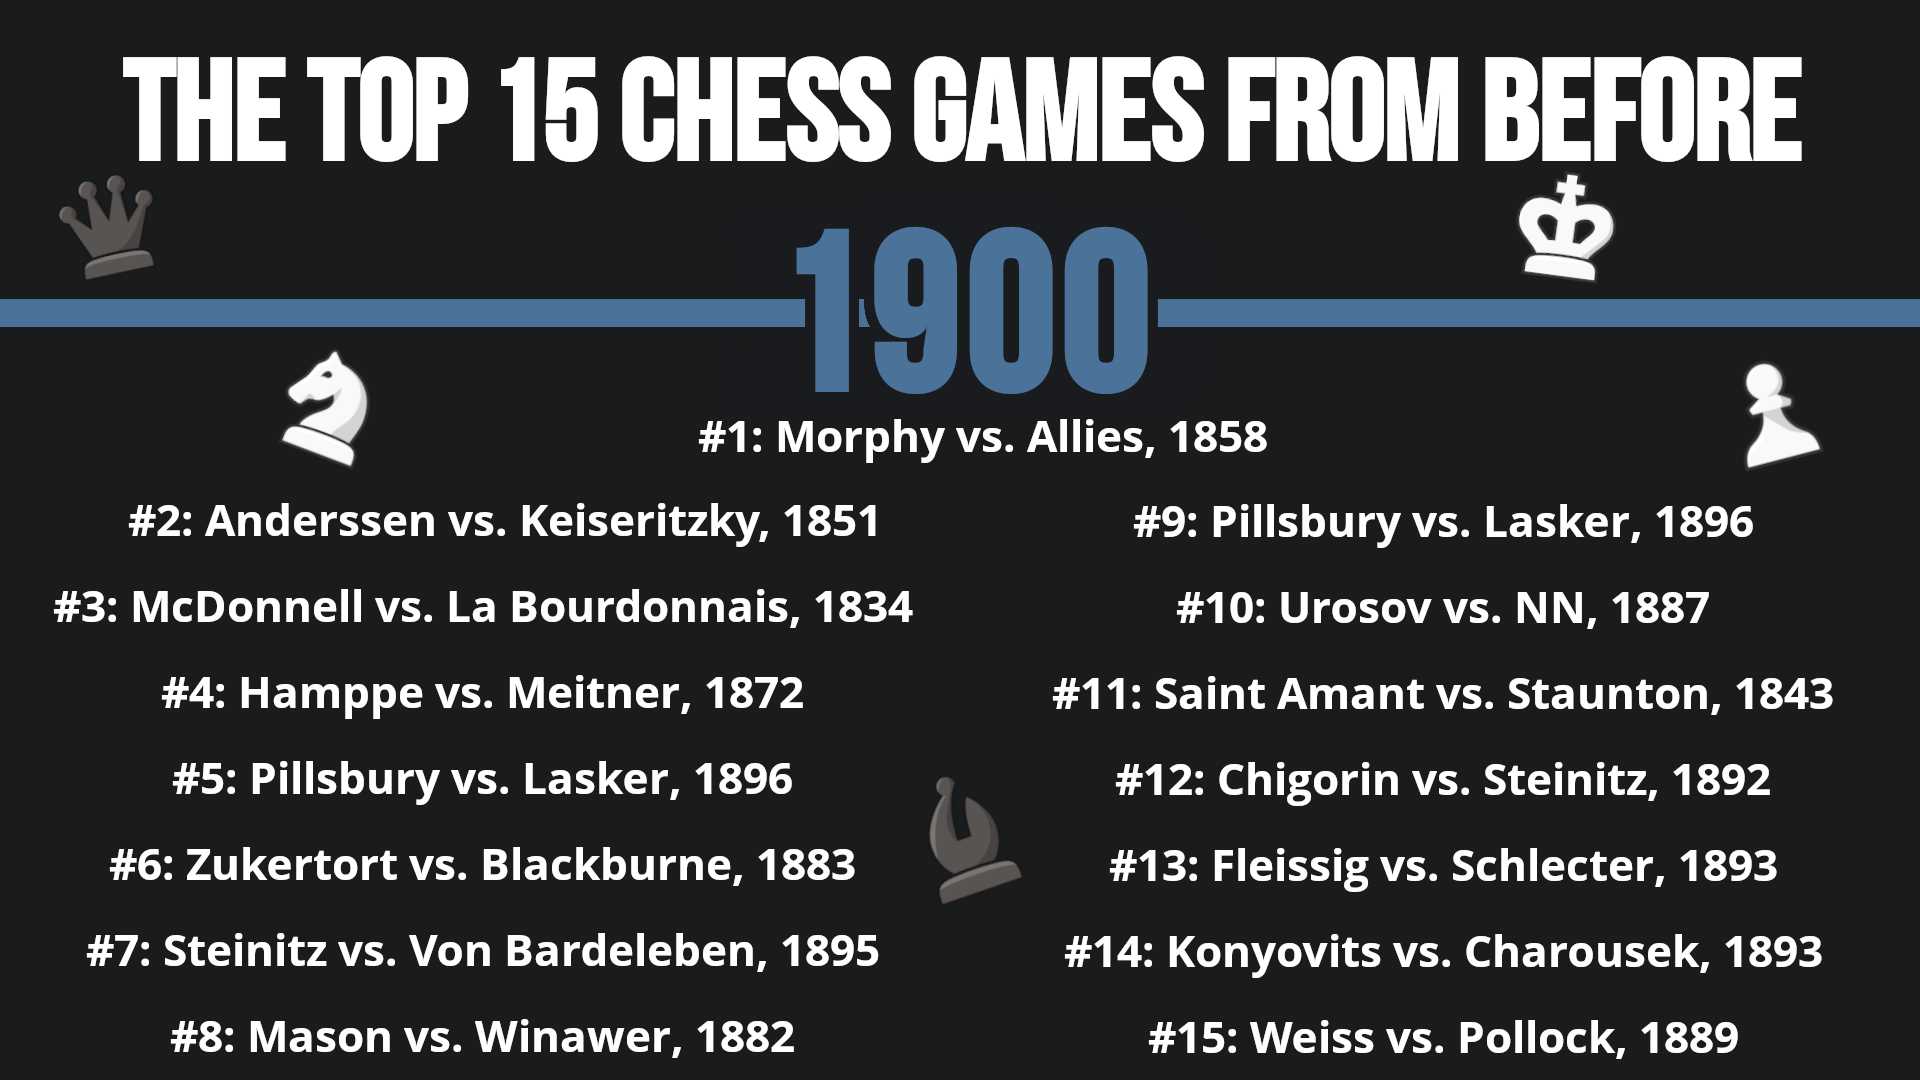 The Top 10 Chess Games Of The 1980s (And 90+ Honorable Mentions